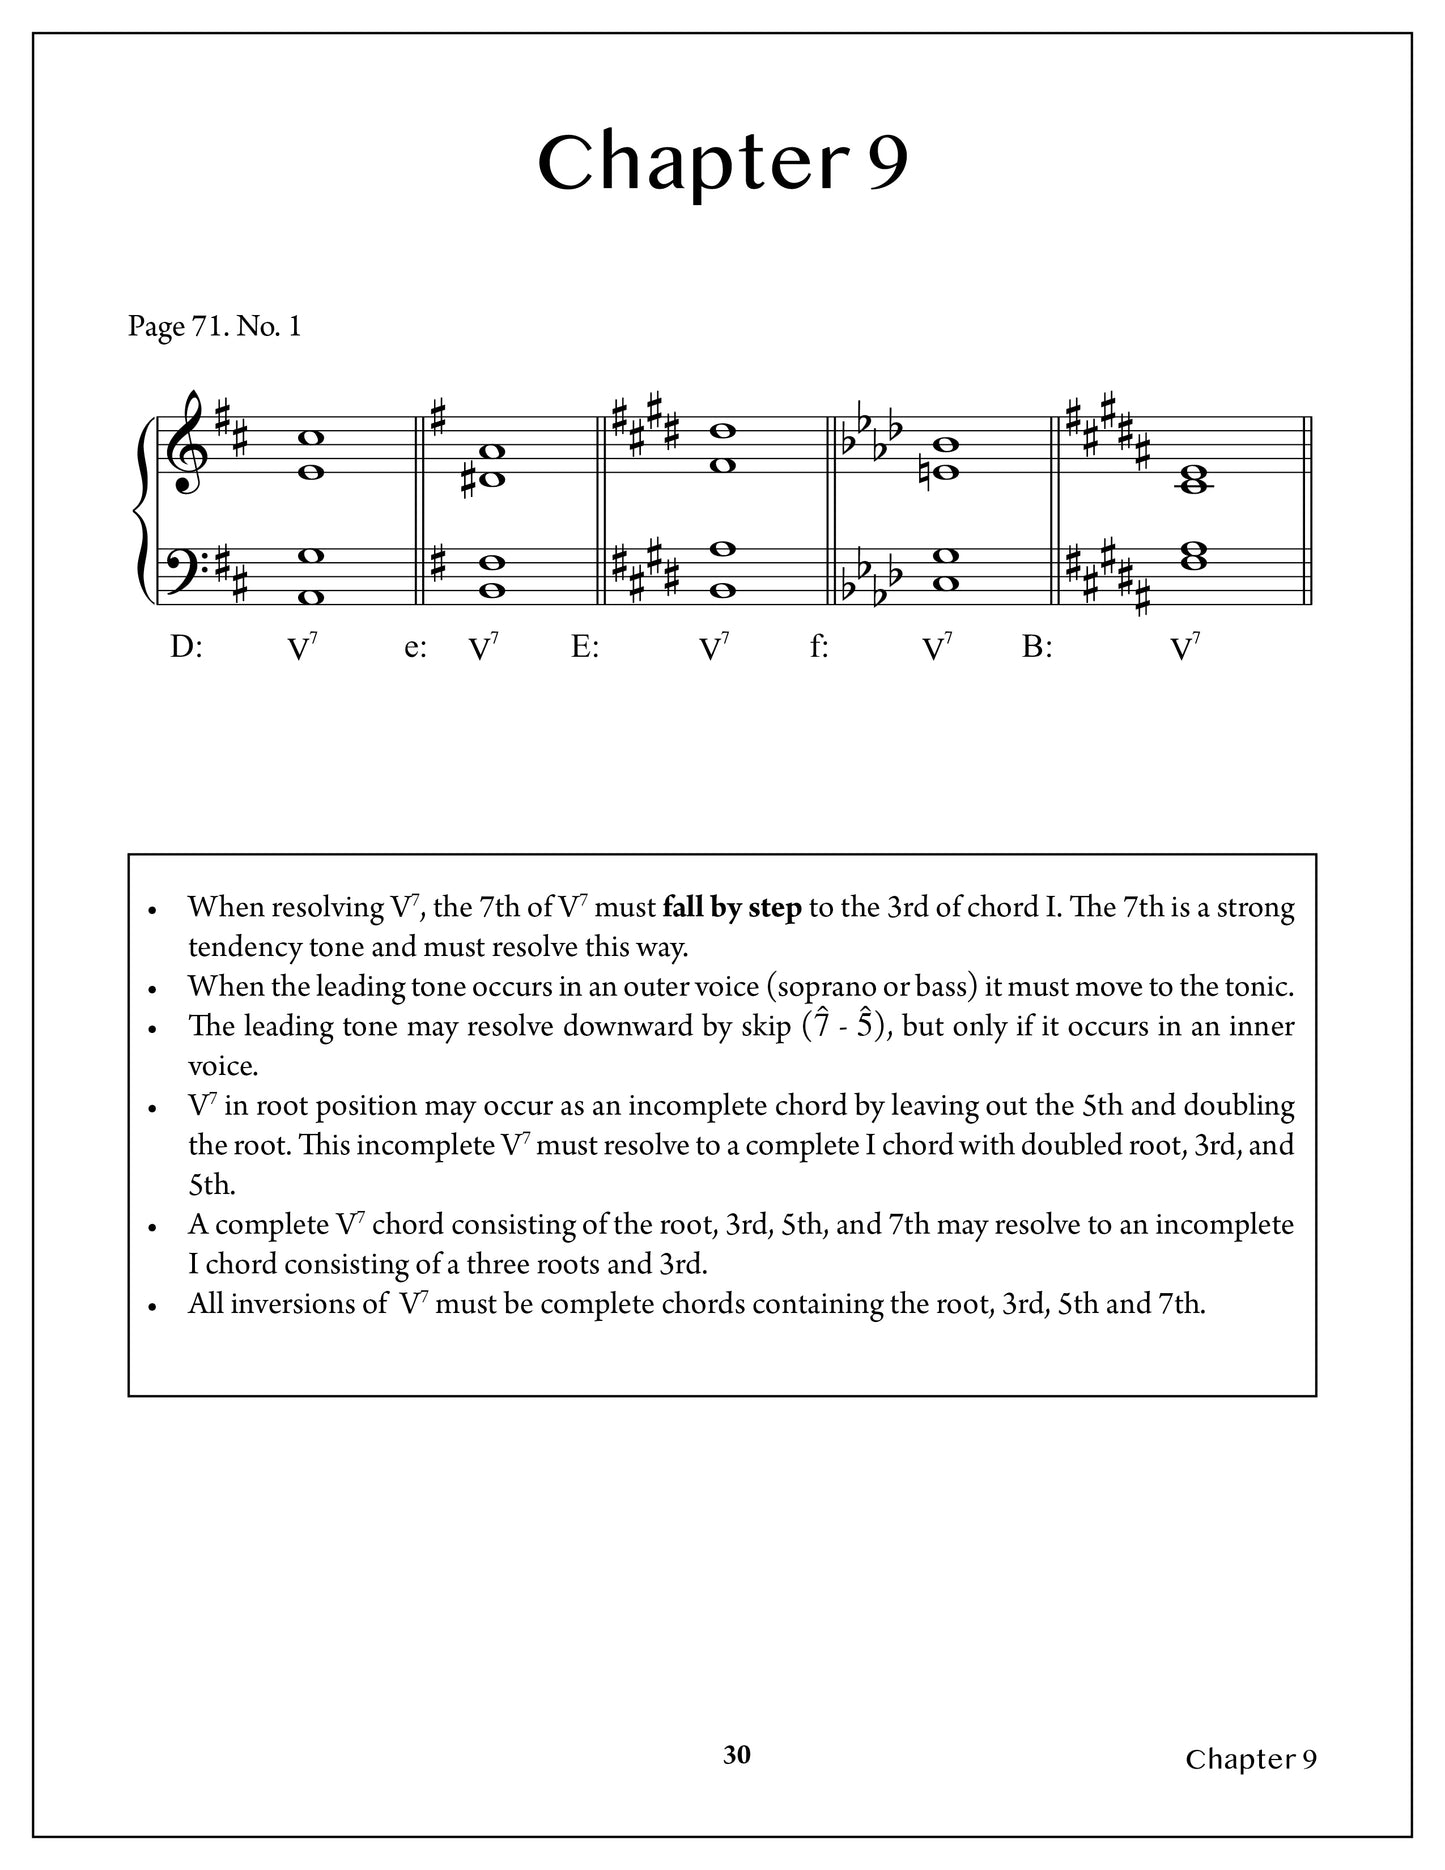 Essential Music Theory Answers Level 9